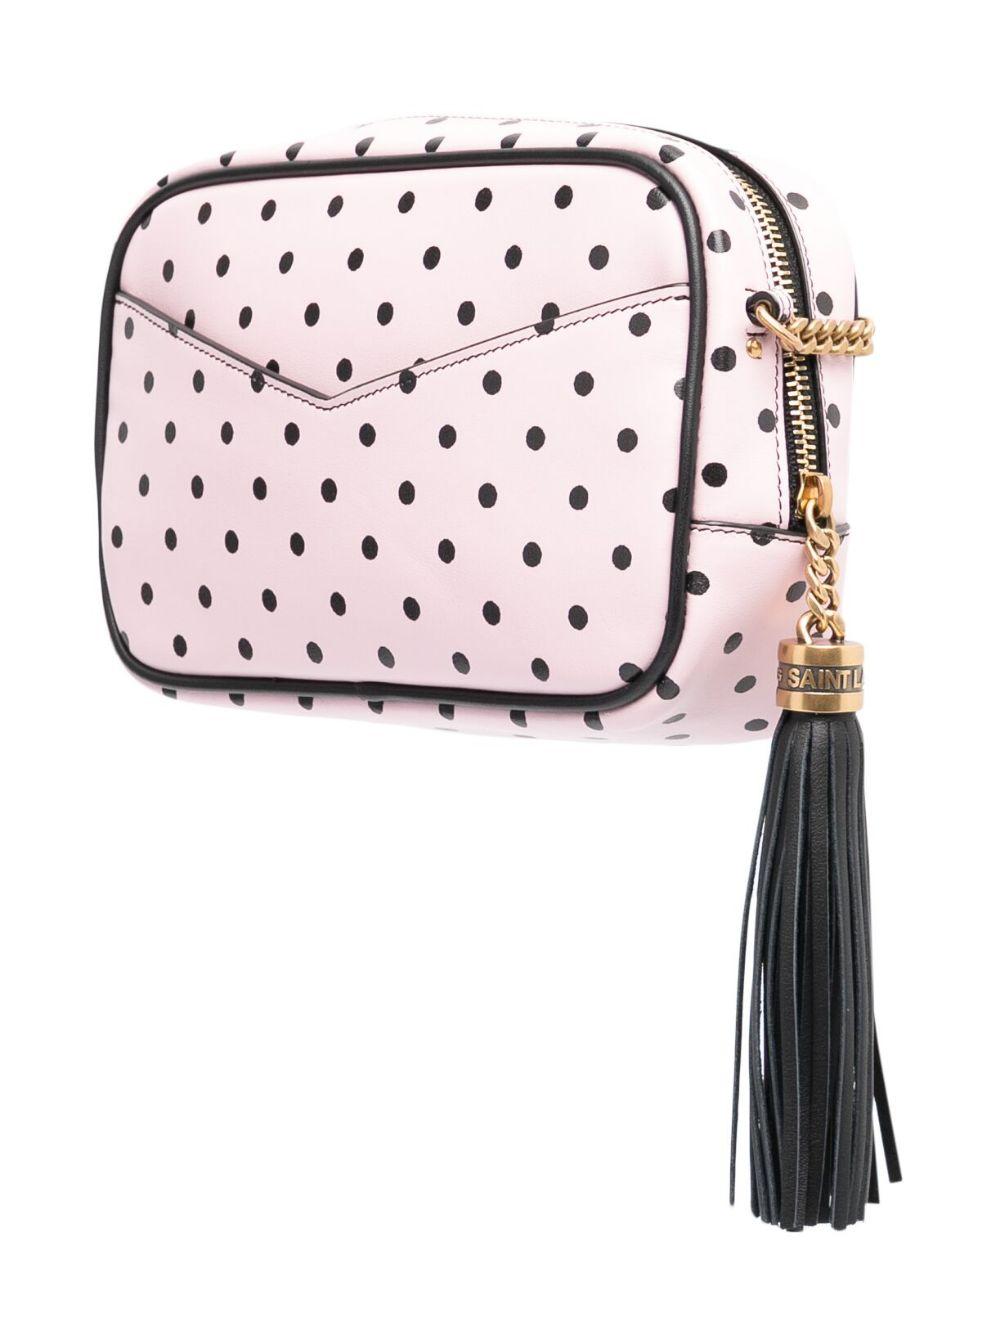 Featuring interlaced YSL initials on the front, this printed mini bag is equipped with a chain strap and adorned with a leather tassel. Card slots inside keep essentials at hand.
Leather
Zipper closure
Made in Italy

Size
Width: 7